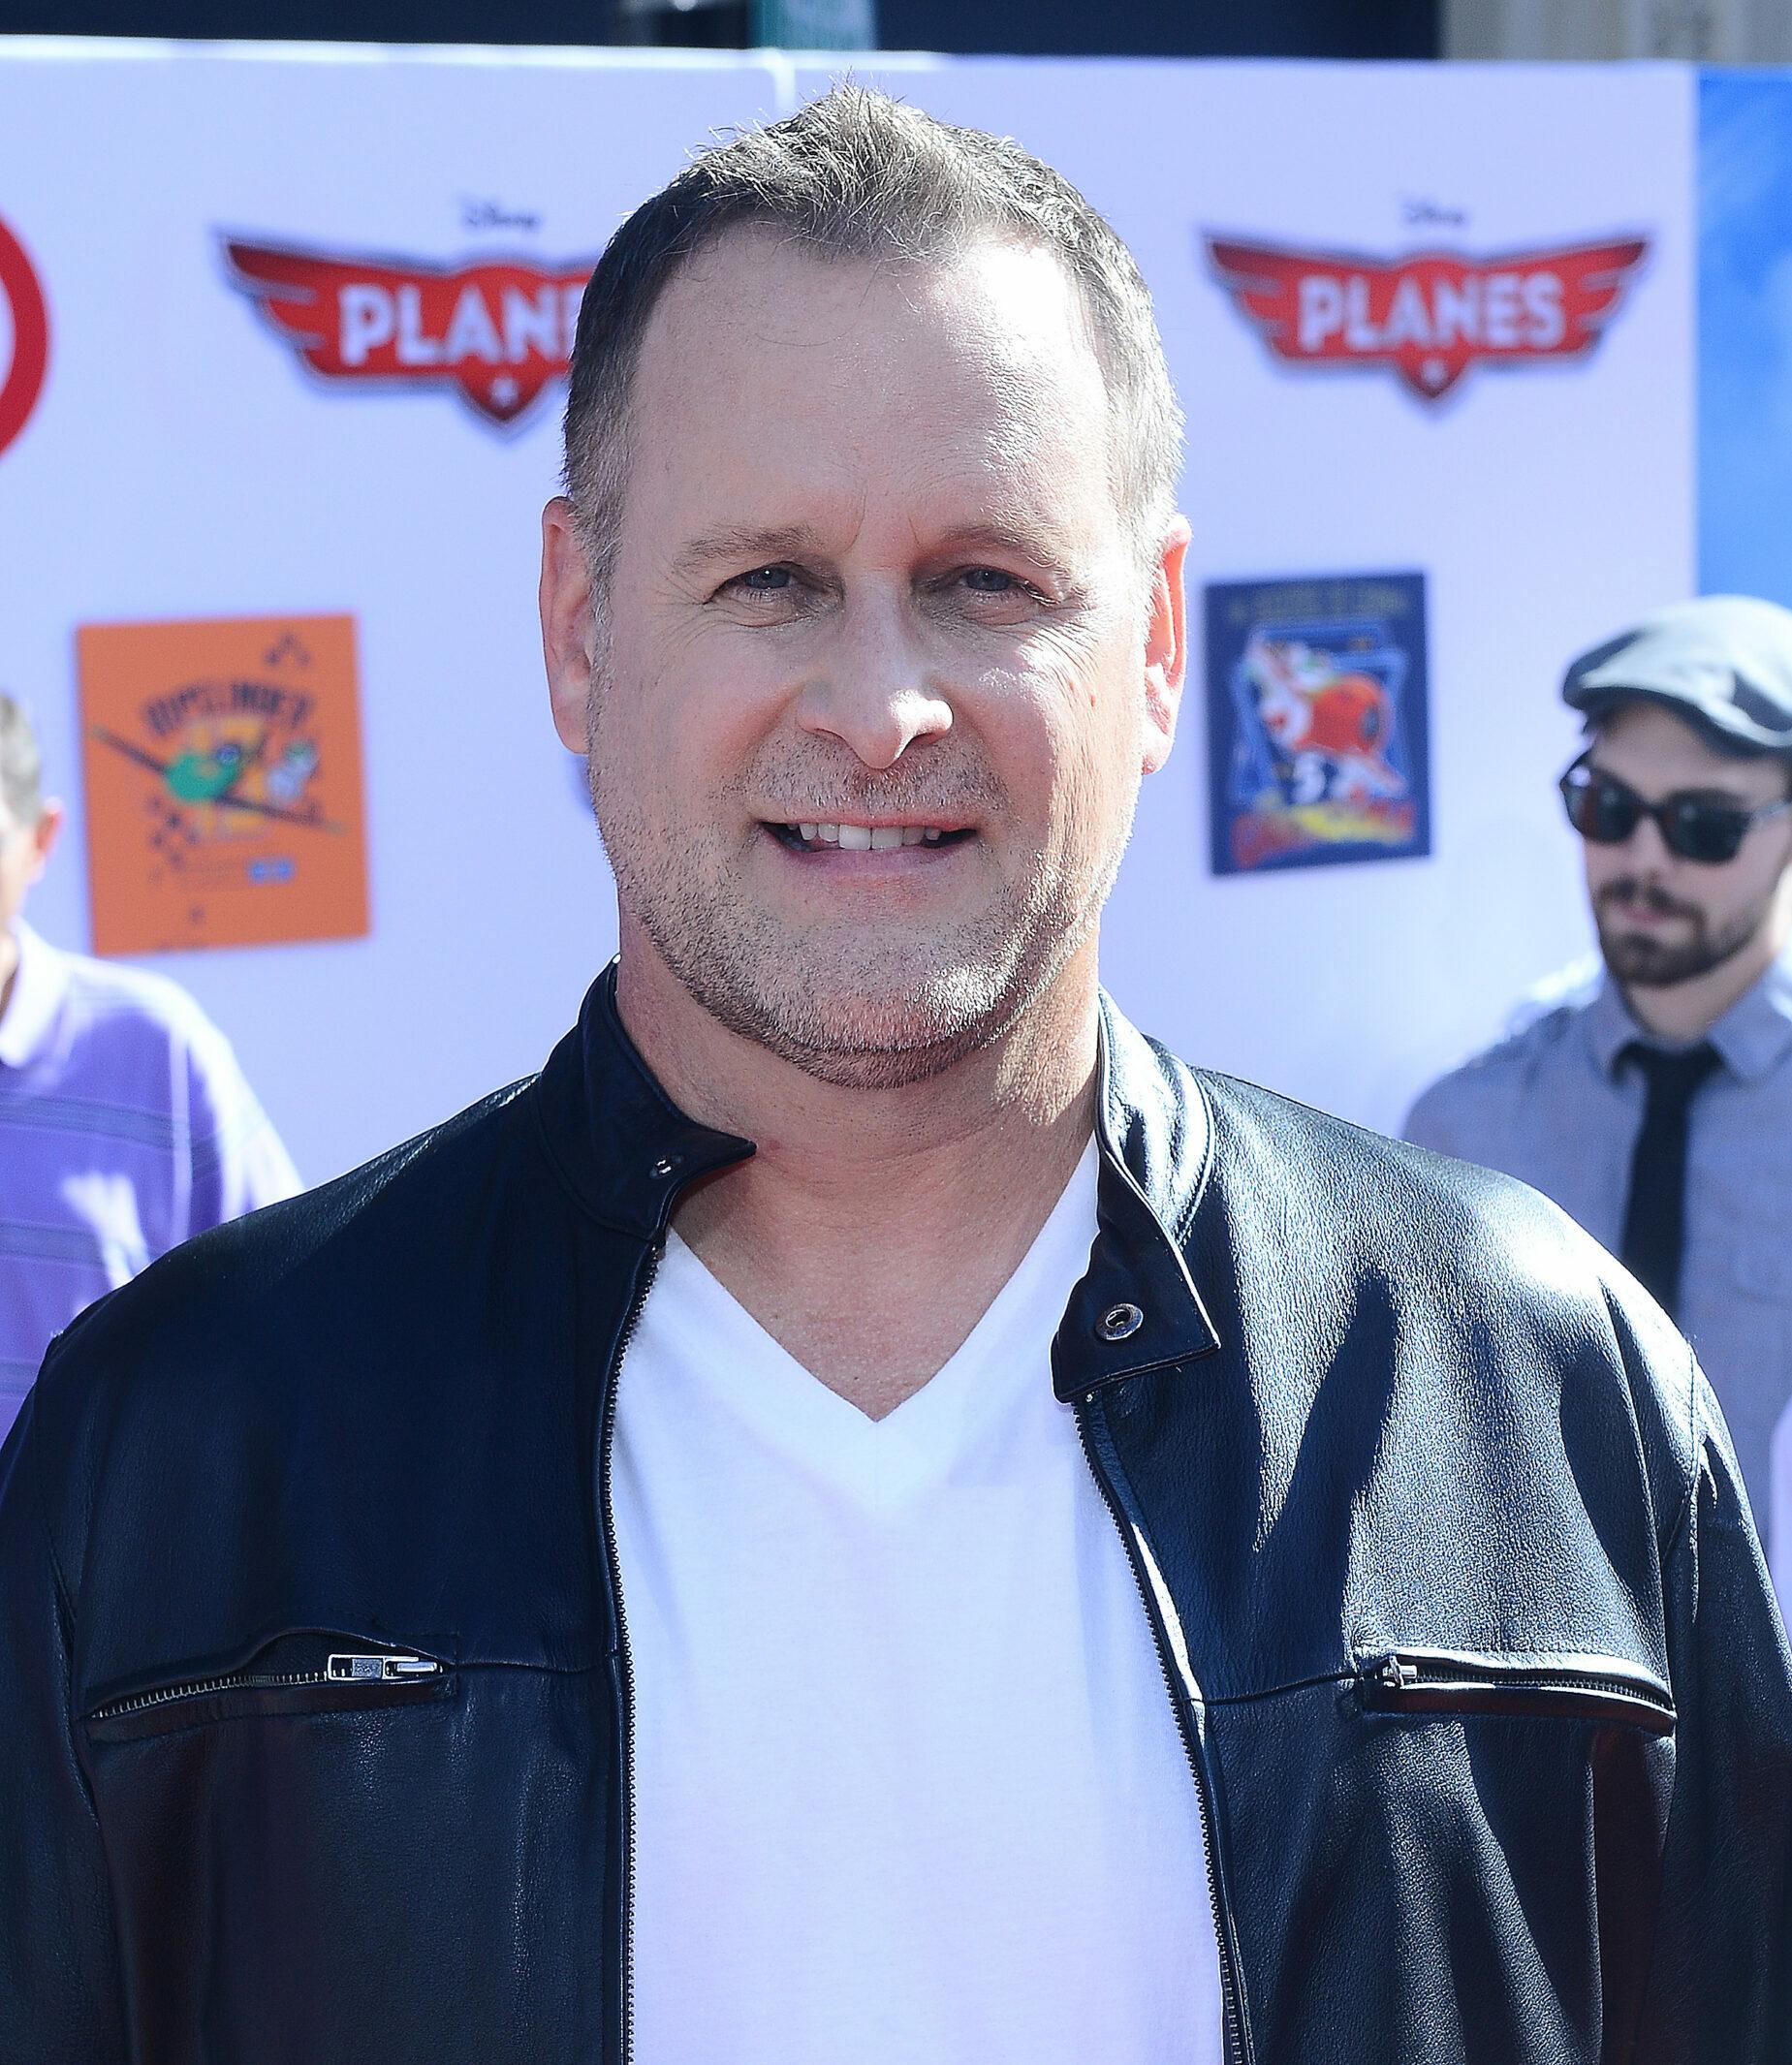 Actor Dave Coulier attends the premiere of the motion picture animated comedy "Planes" at the El Capitan Theatre in the Hollywood section of Los Angeles